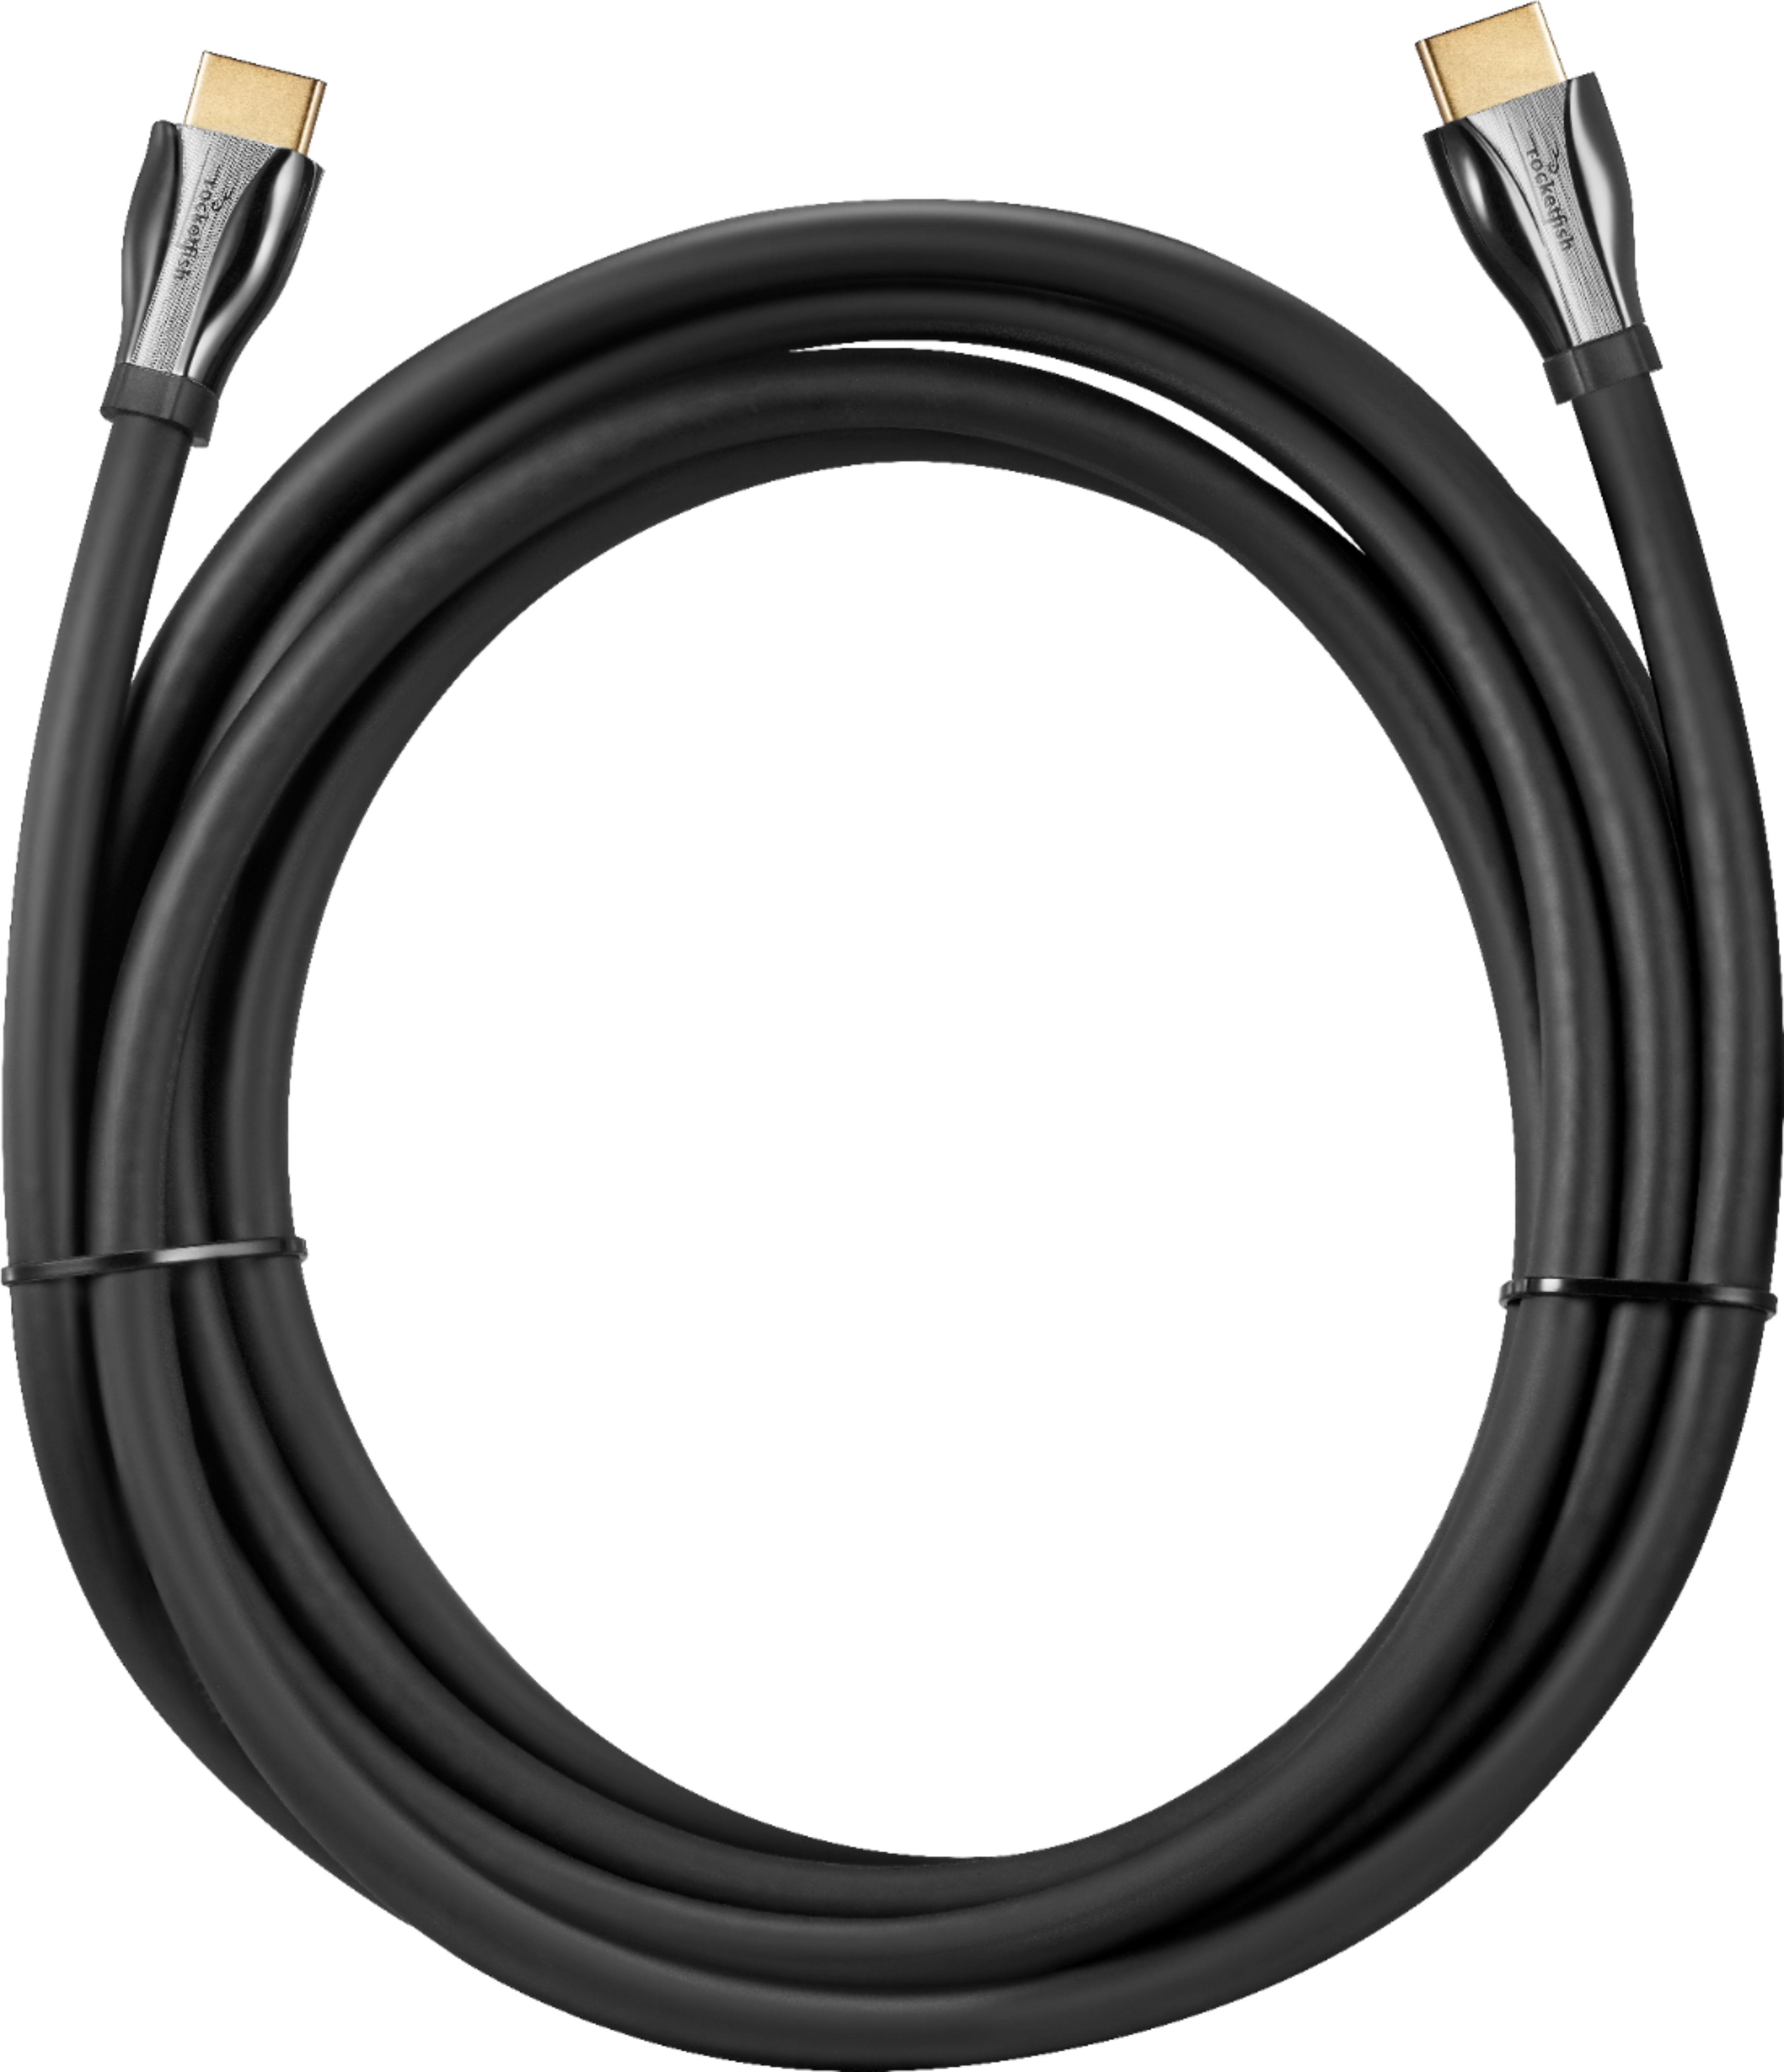 QED QE6037 Performance Optical 8K Ultra High Speed HDMI Cable, 12m